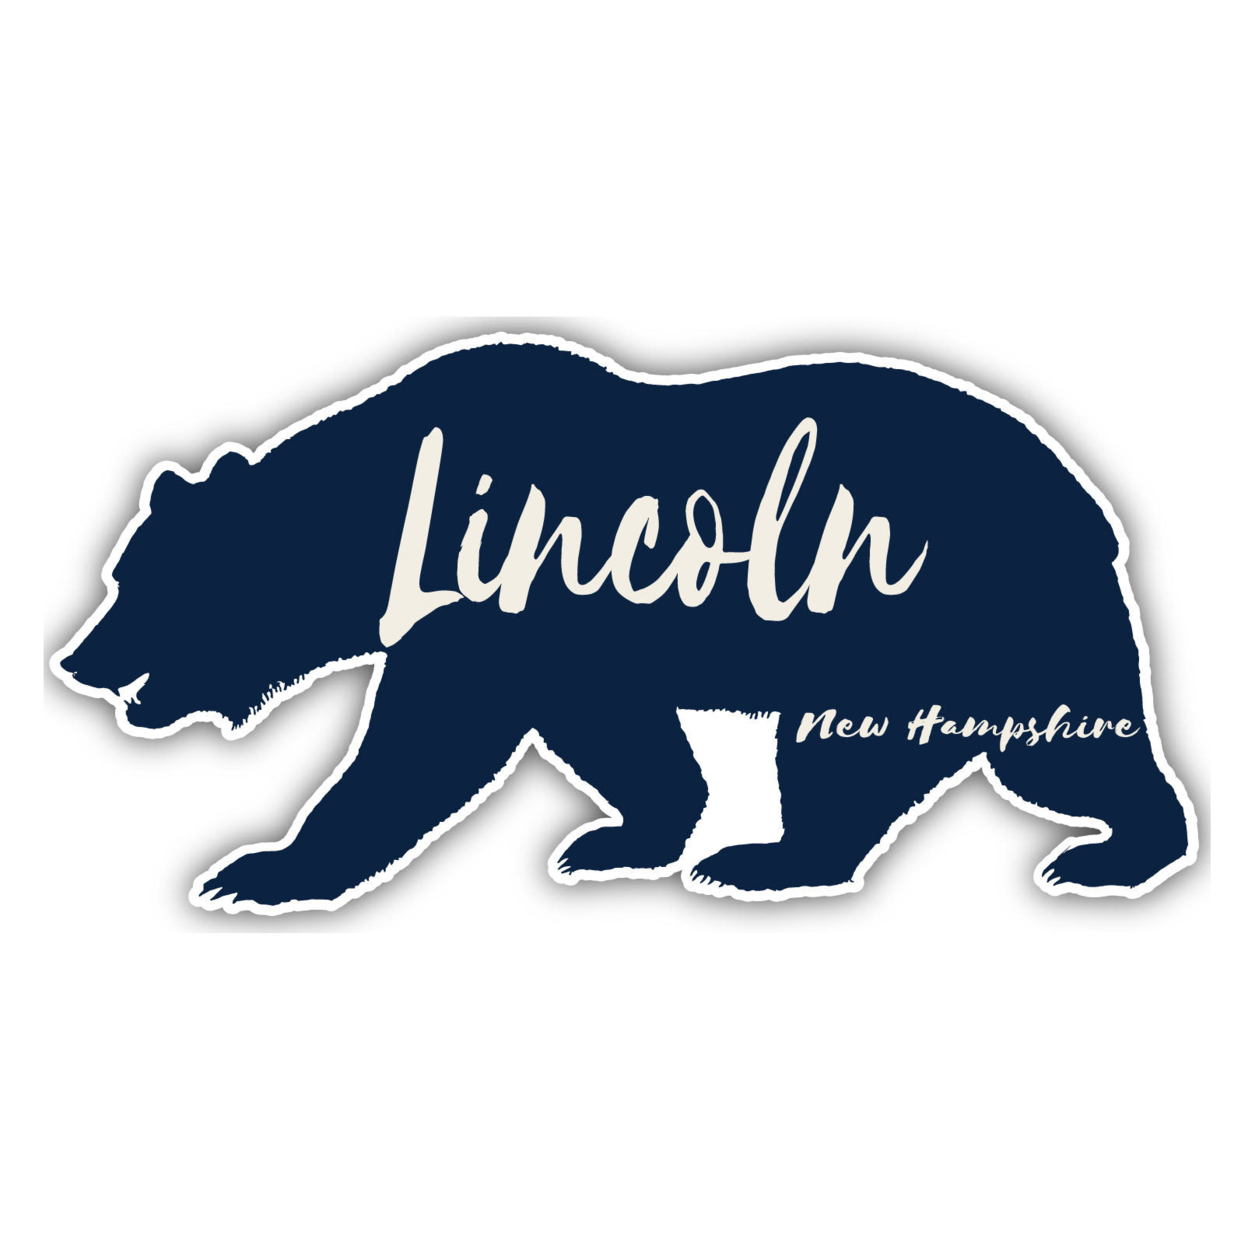 Lincoln New Hampshire Souvenir Decorative Stickers (Choose Theme And Size) - 4-Inch, Tent